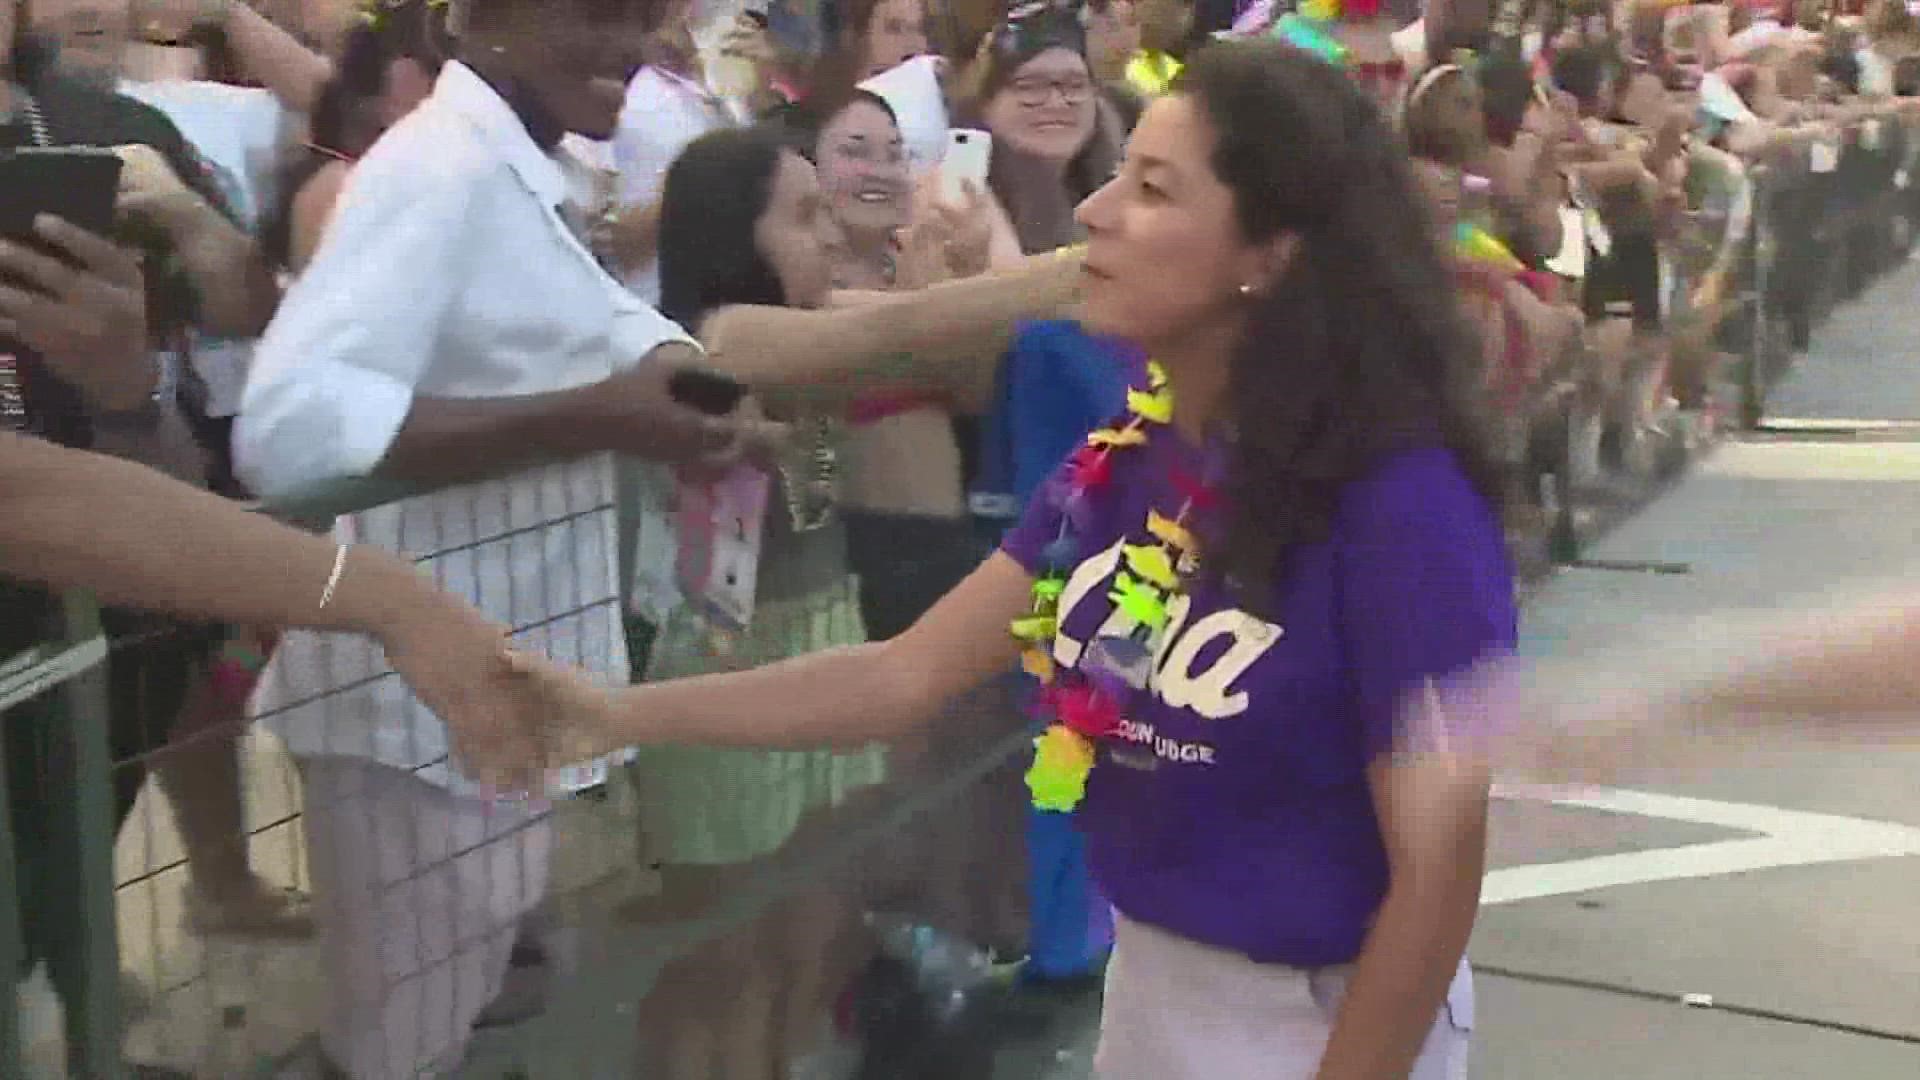 Hidalgo said she tested negative Saturday before attending Houston's Pride Houston 365 Parade, but retested Sunday and came back positive.